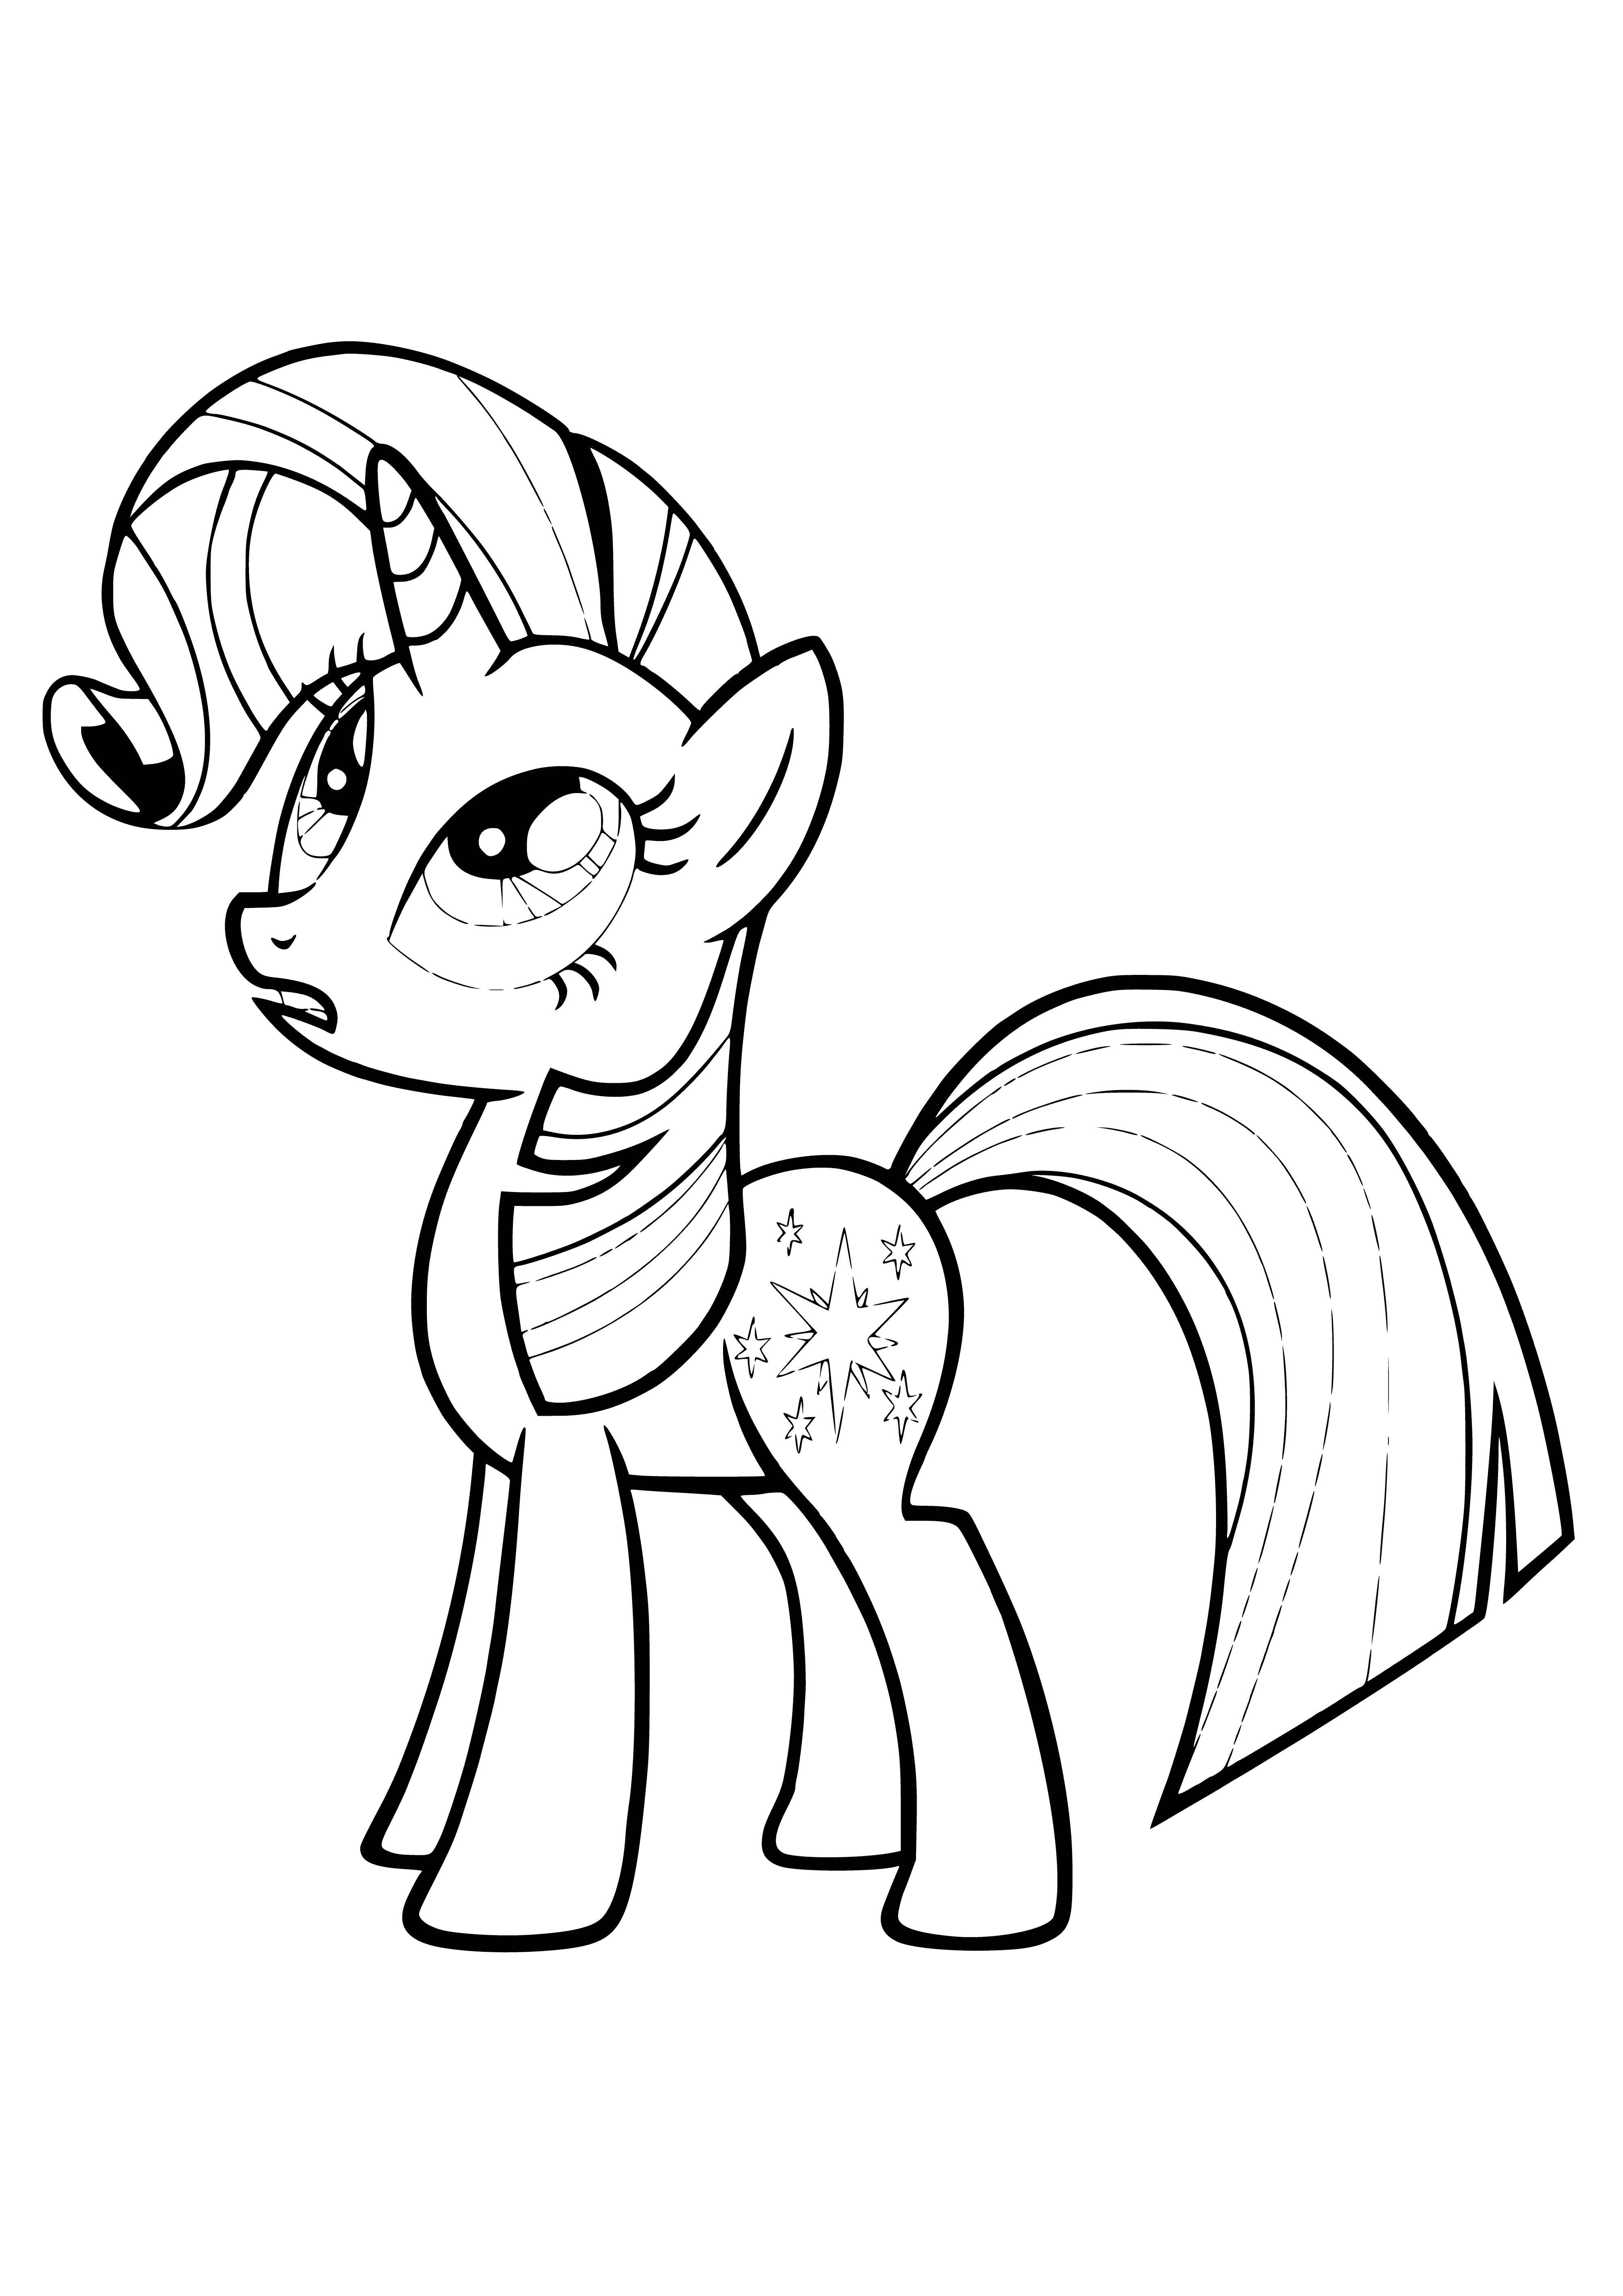 coloring page: A purple unicorn stands intently on green grass before a dark tree, red gem glowing behind her.